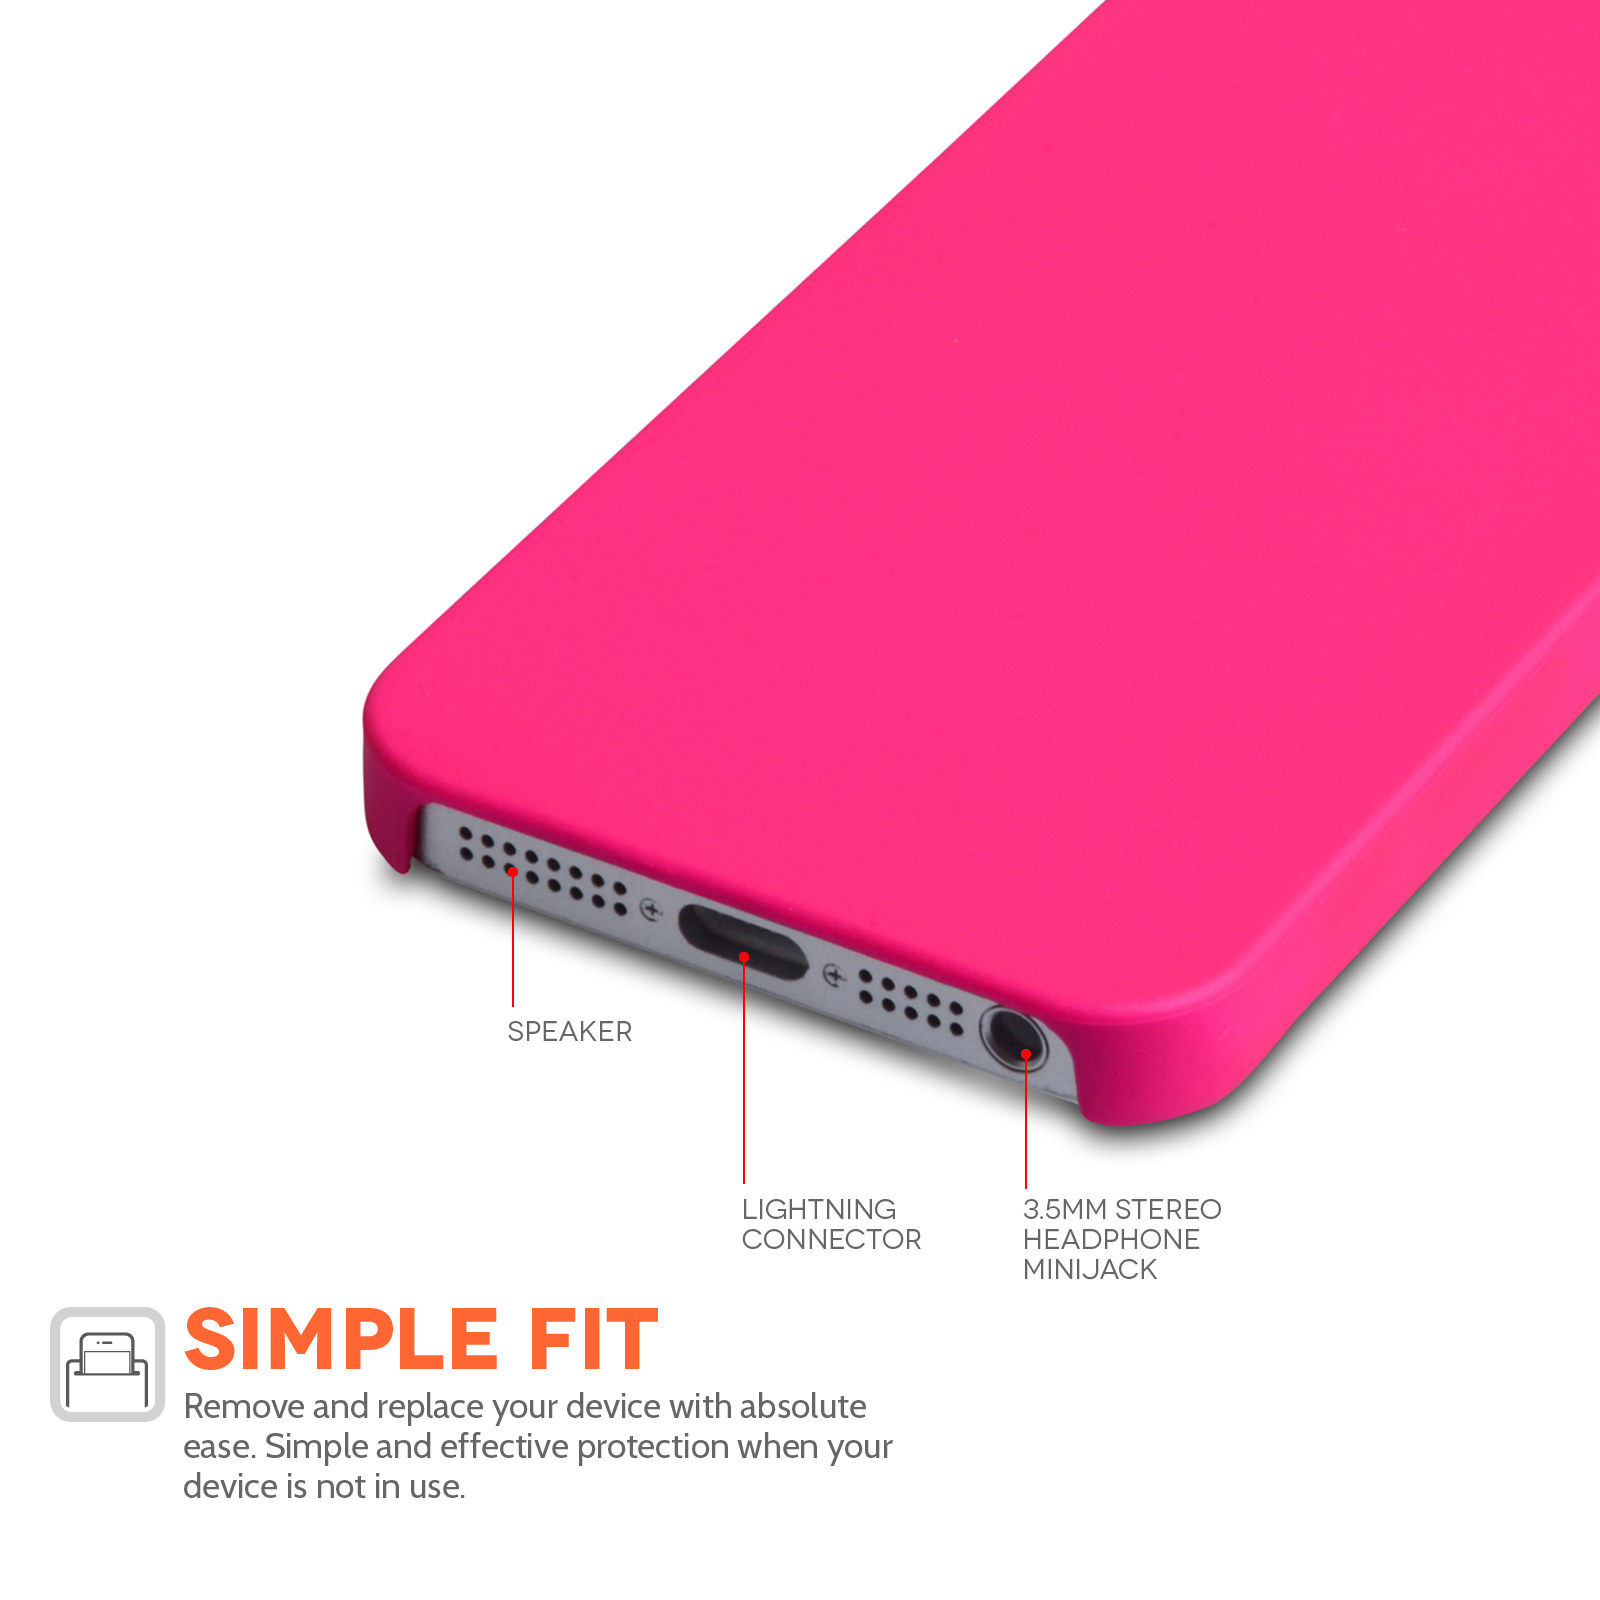 YouSave Accessories iPhone 5 / 5S Hard Hybrid Case - Hot Pink